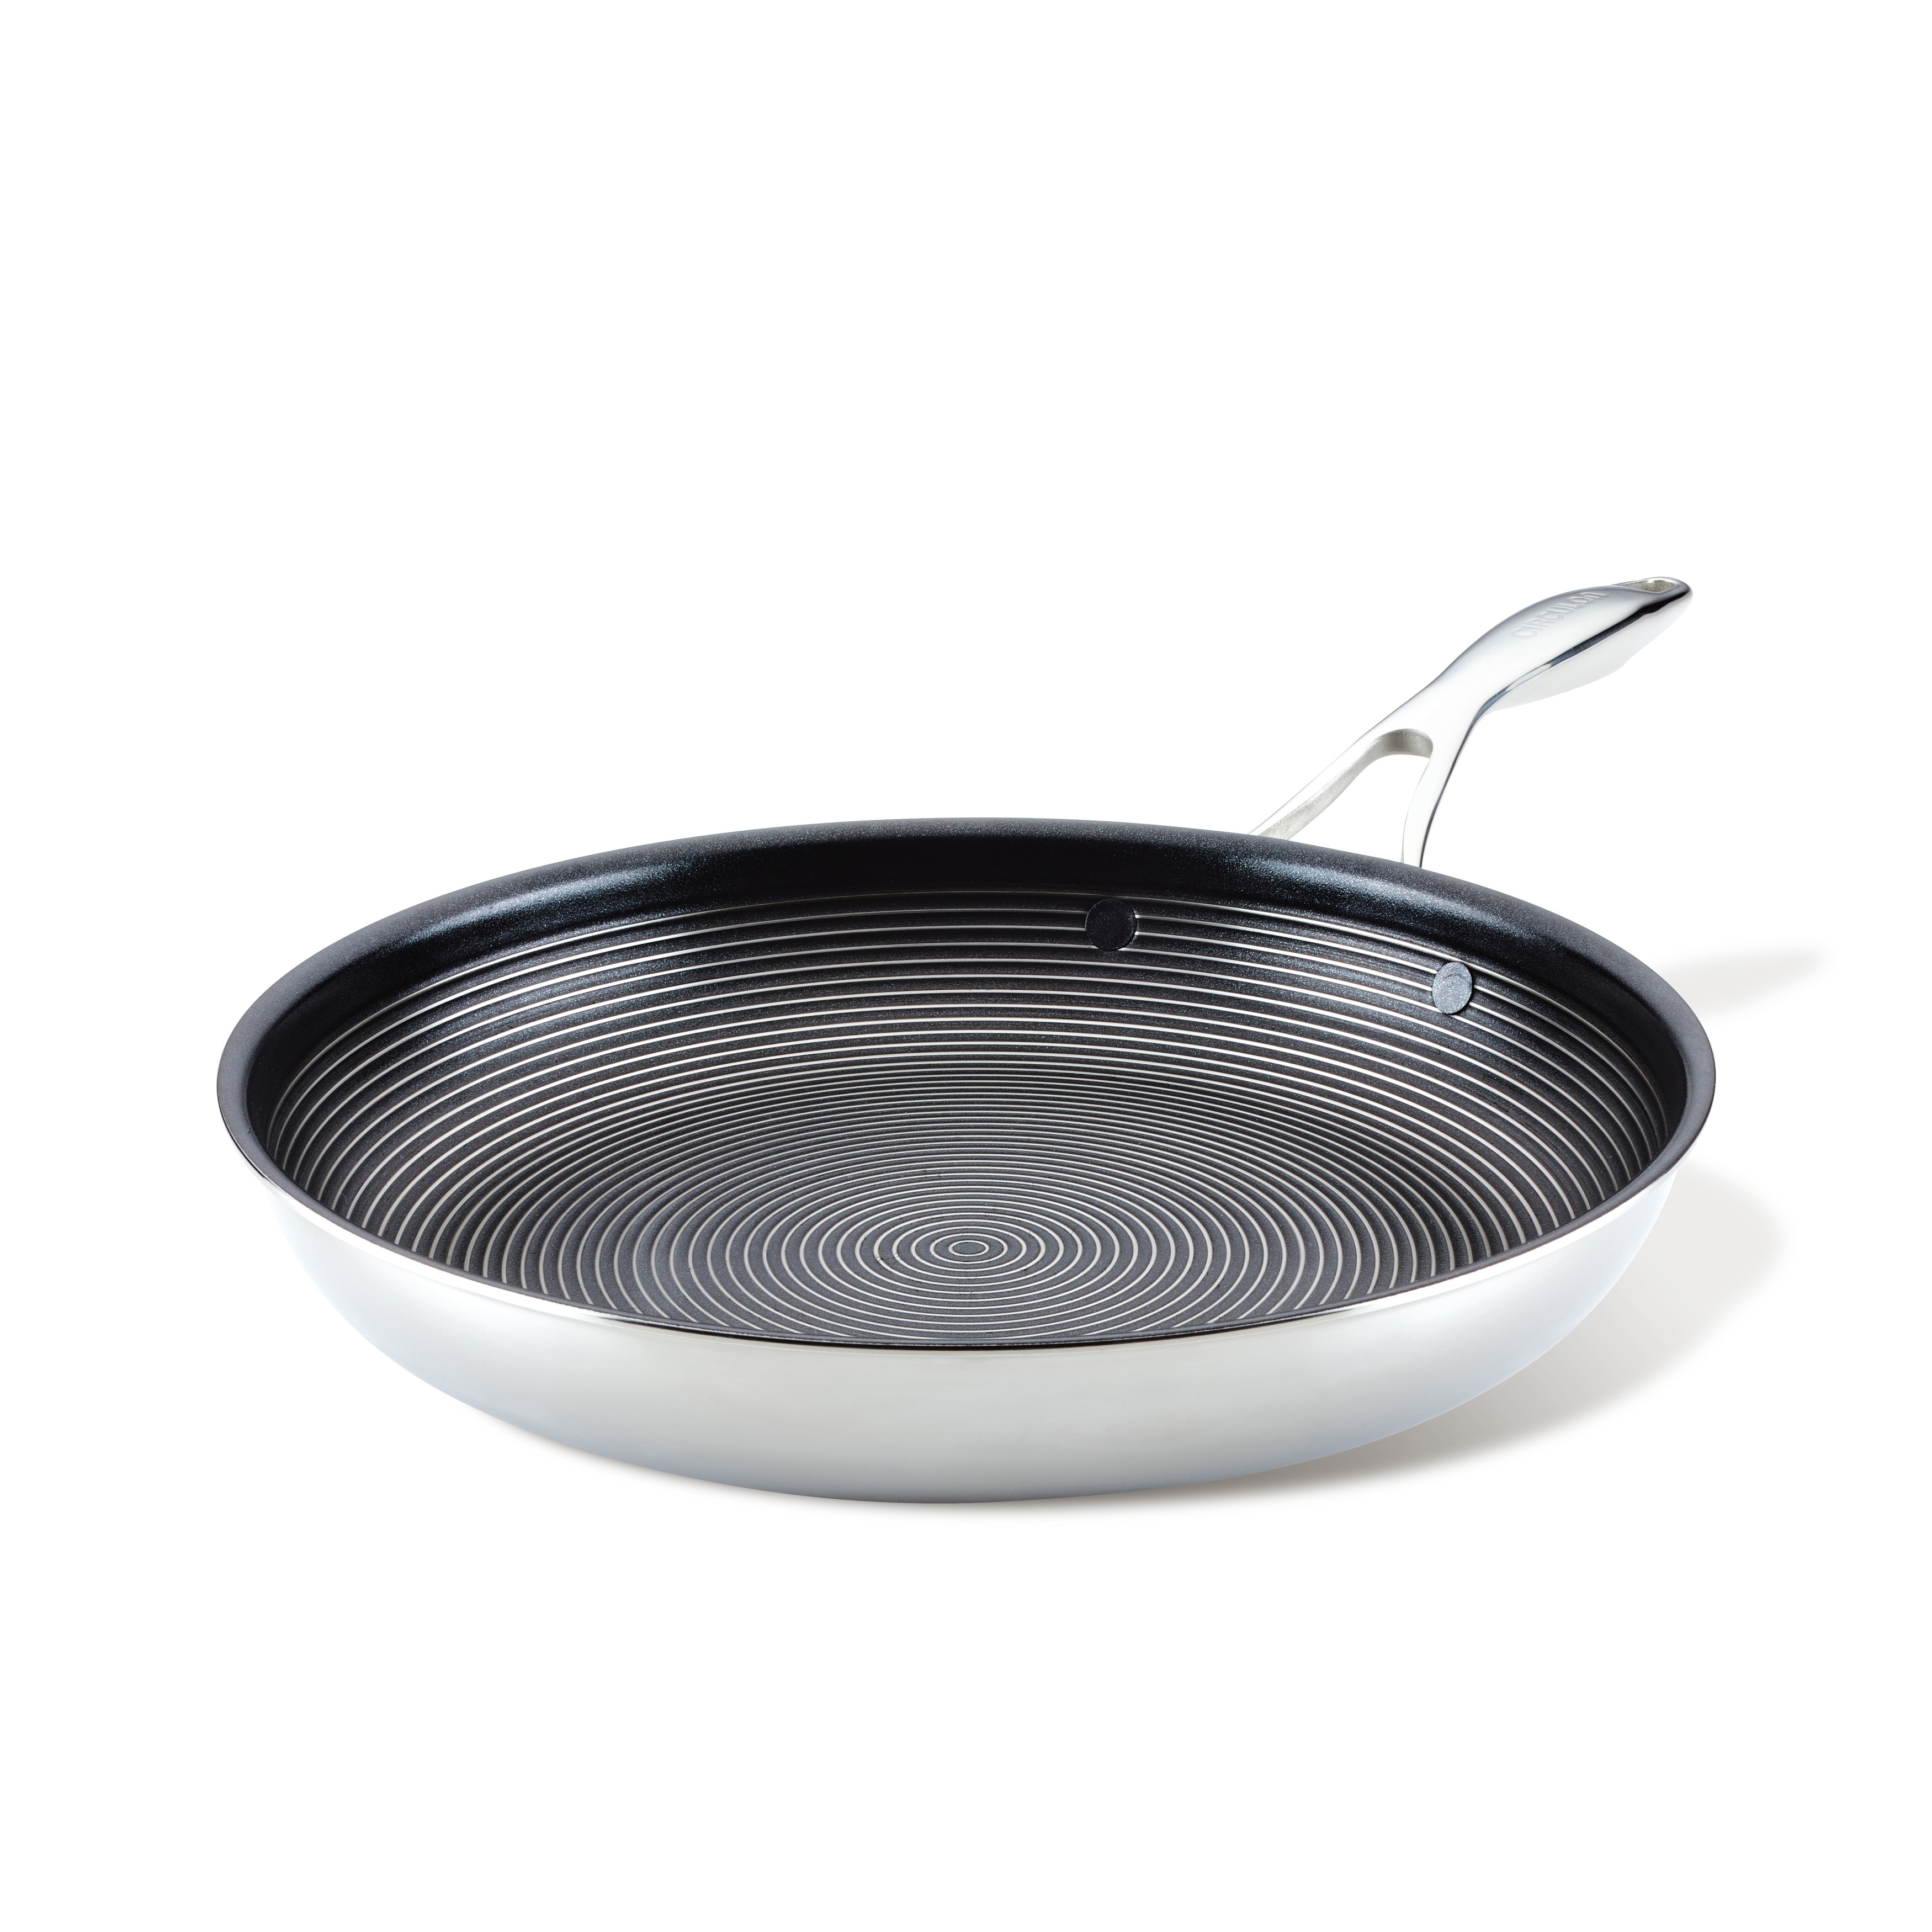 https://ak1.ostkcdn.com/images/products/is/images/direct/f4585ea5798e0a61e79226c8ec8e1abc8eee81d3/Circulon-Clad-Stainless-Steel-Induction-Frying-Pan-with-Hybrid-SteelShield-and-Nonstick-Technology%2C-12.5-Inch%2C-Silver.jpg